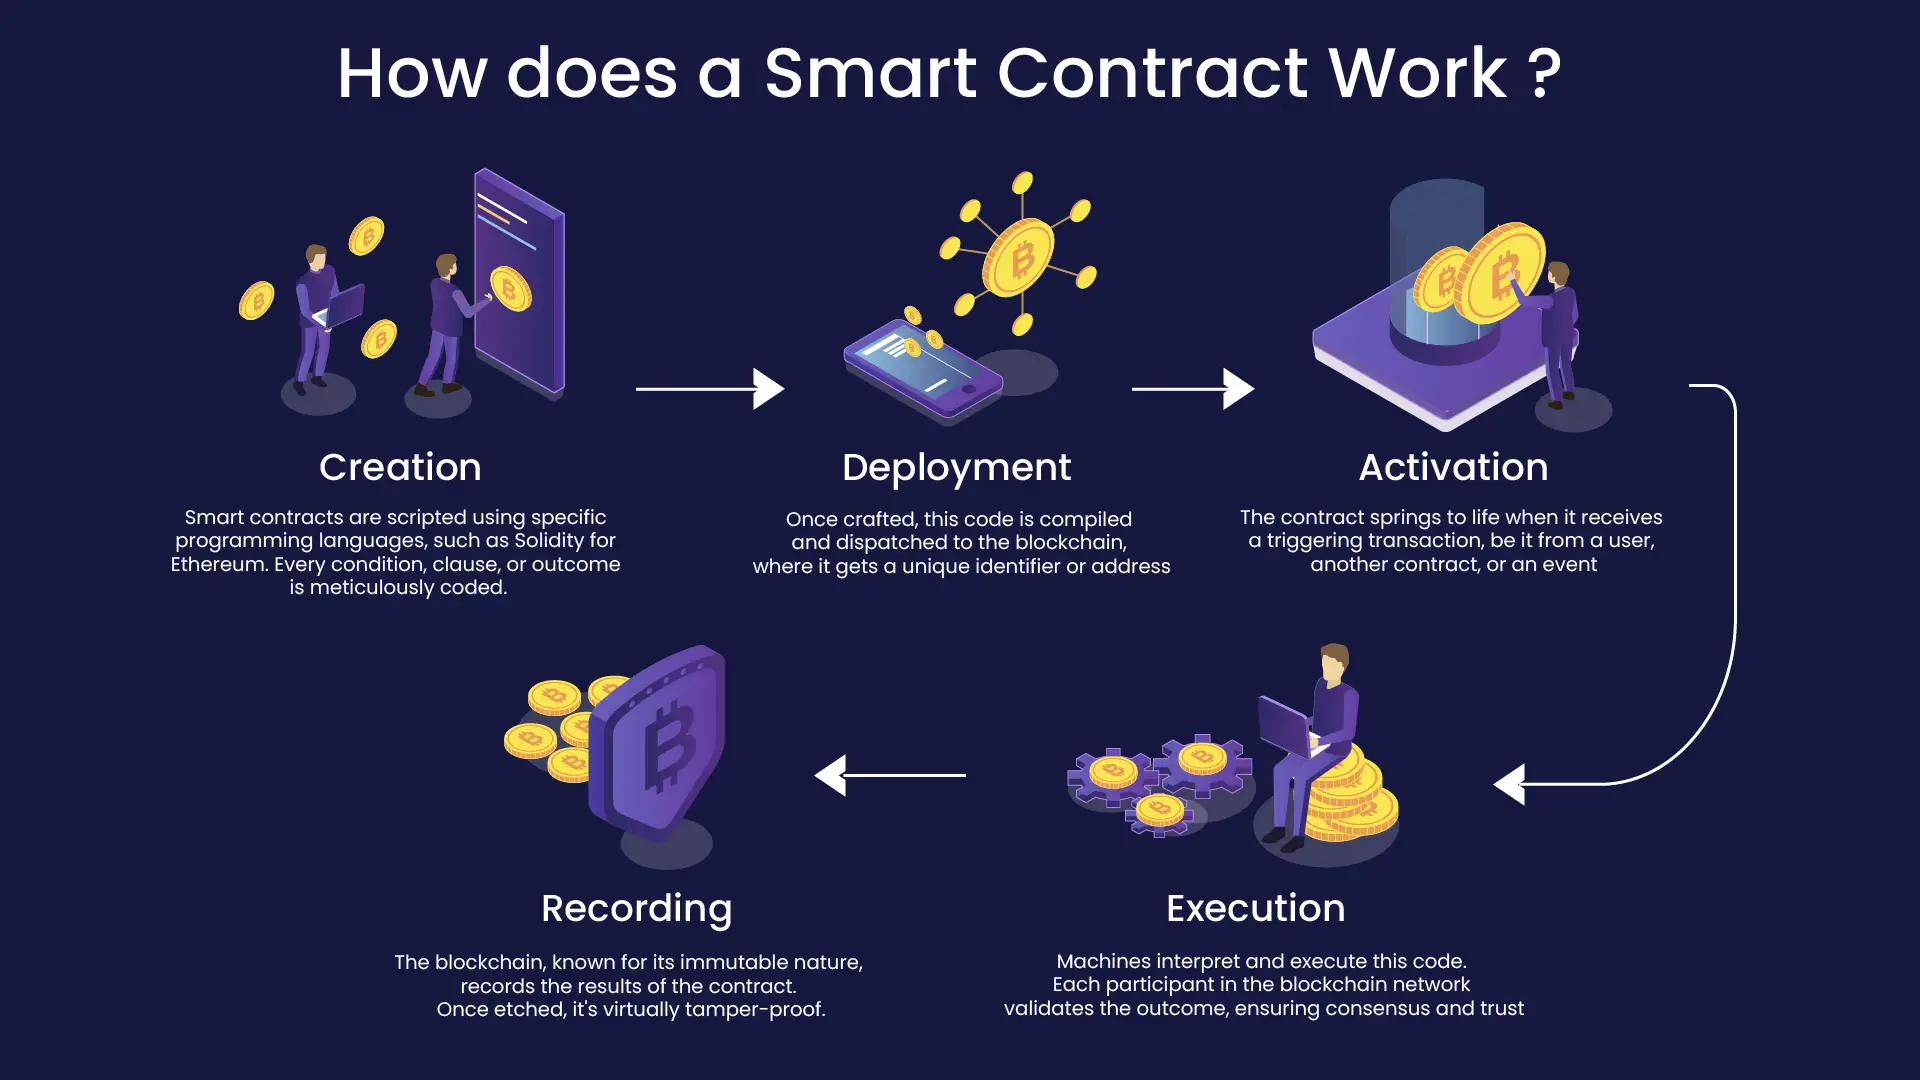 An illustration of how smart contracts work